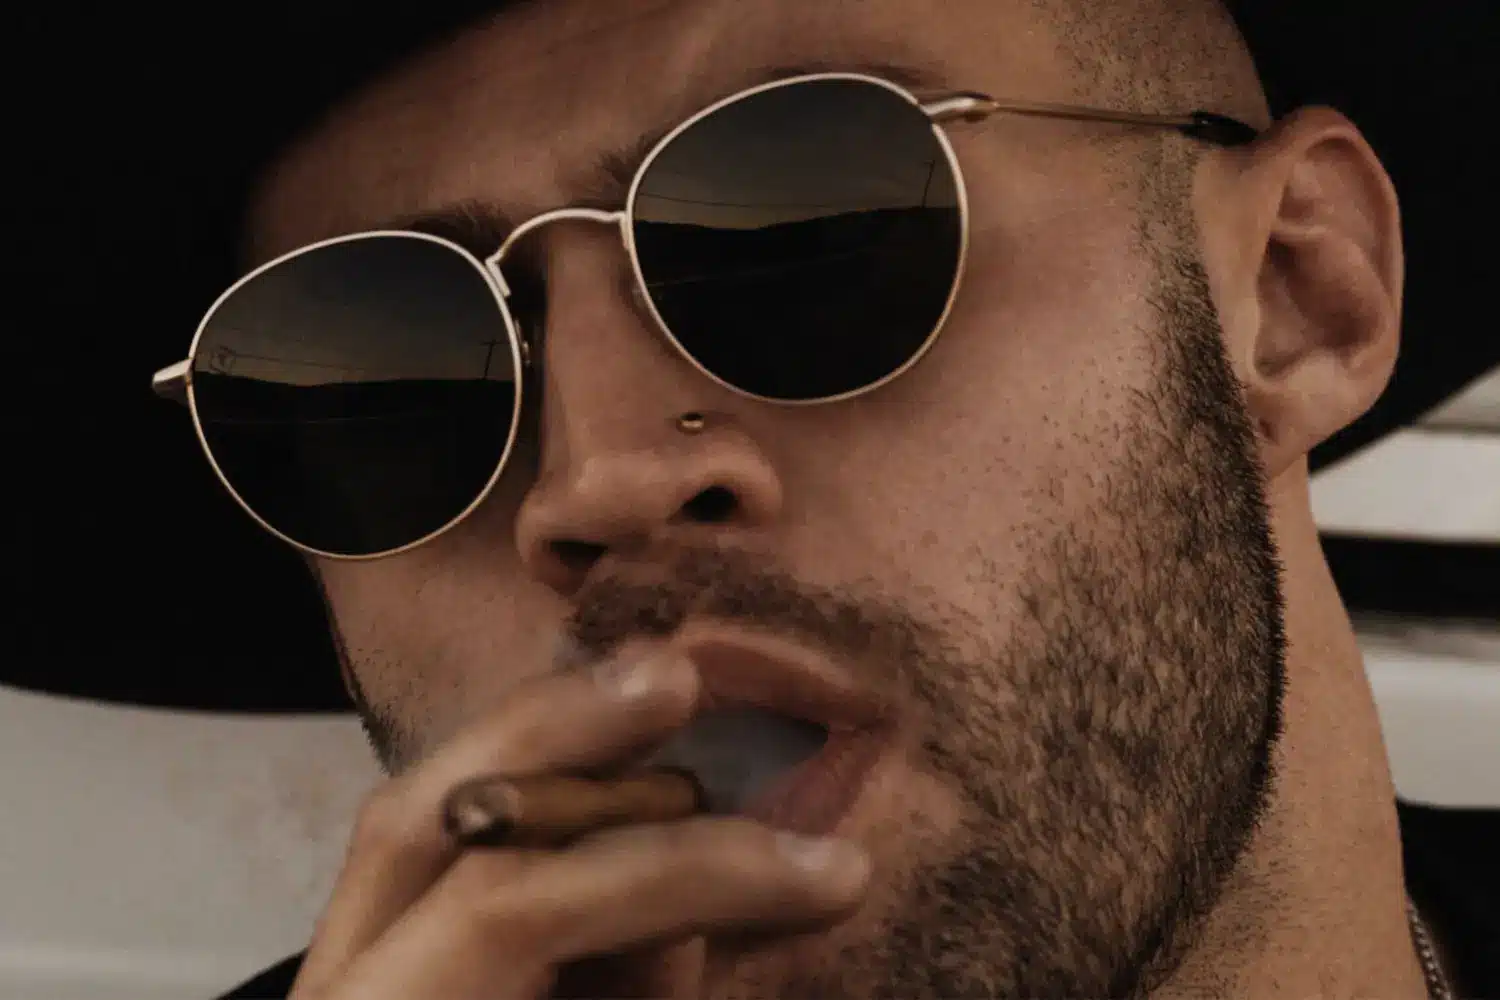 man with sunglasses and pierced nose smoking cigar